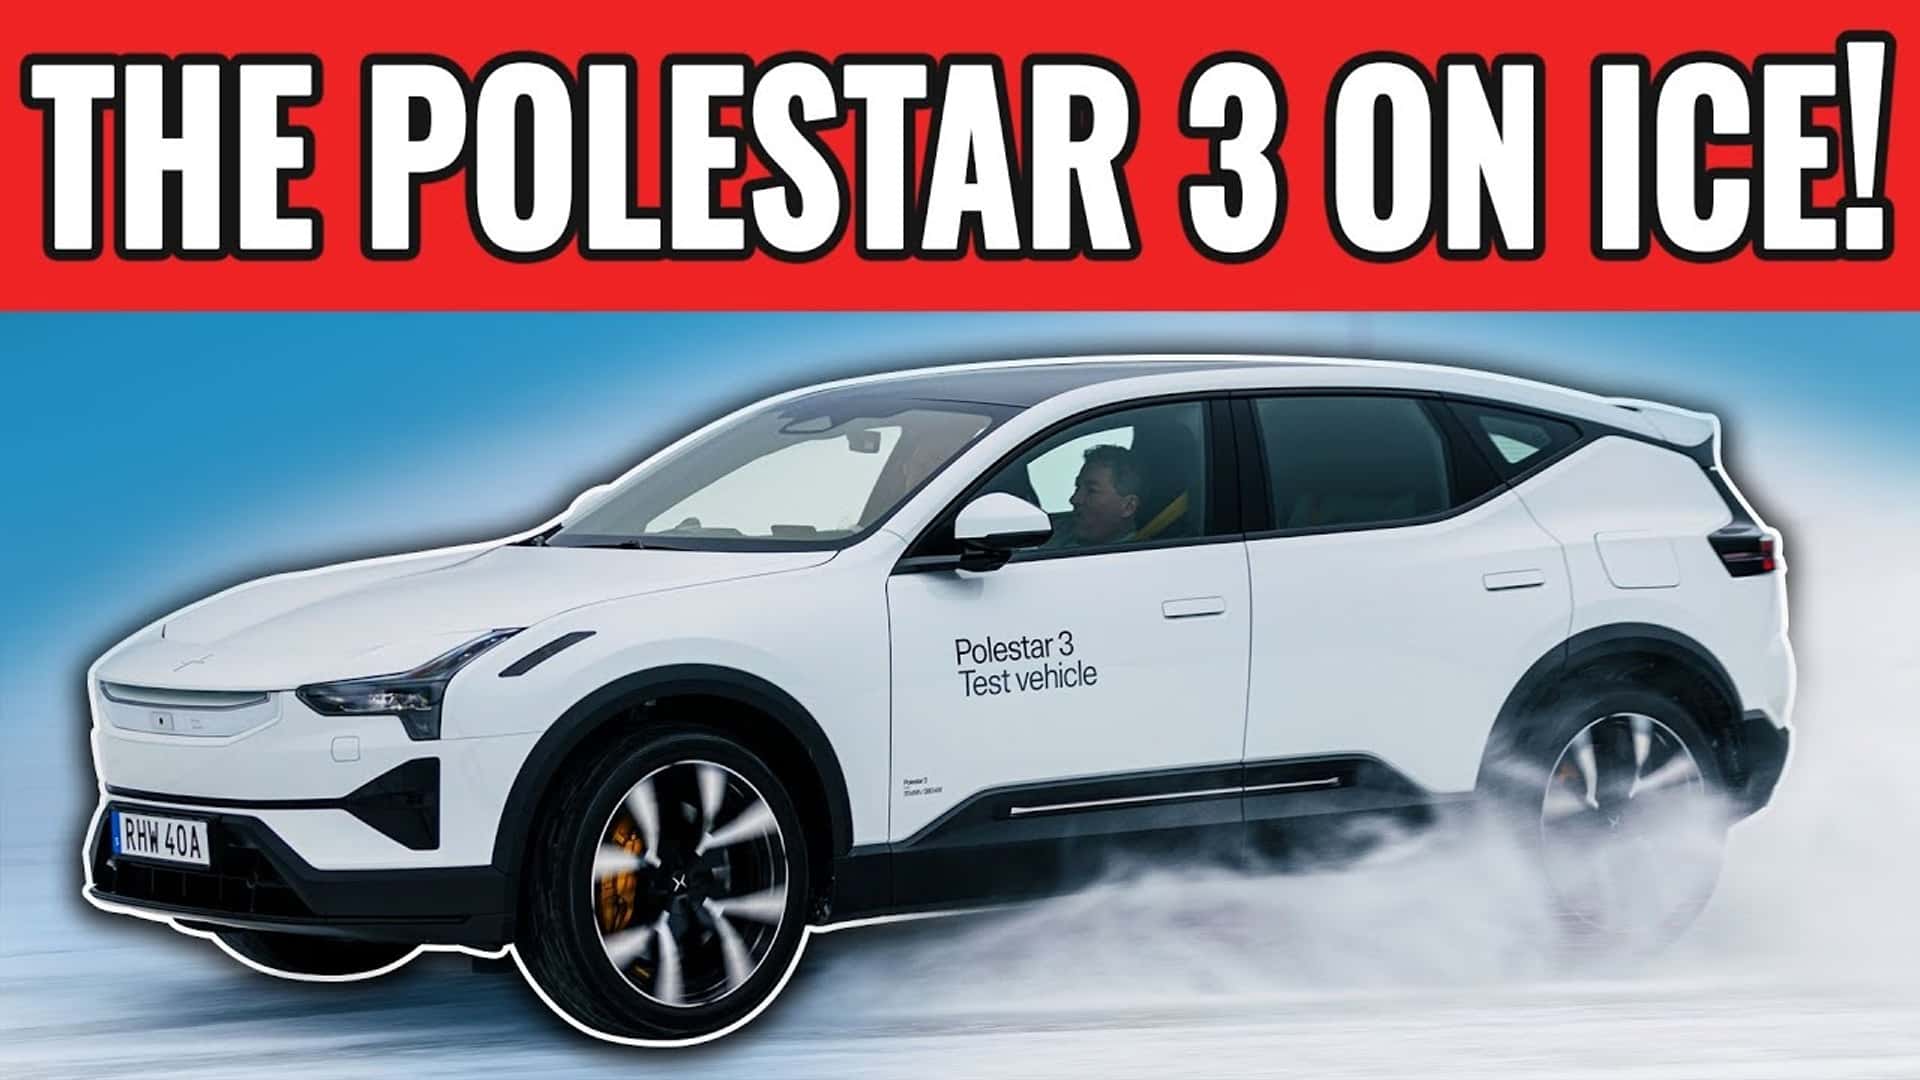 I Tested A Polestar 3 On A Frozen Lake. It Handles Ice Like A Pro Dancer [Video]